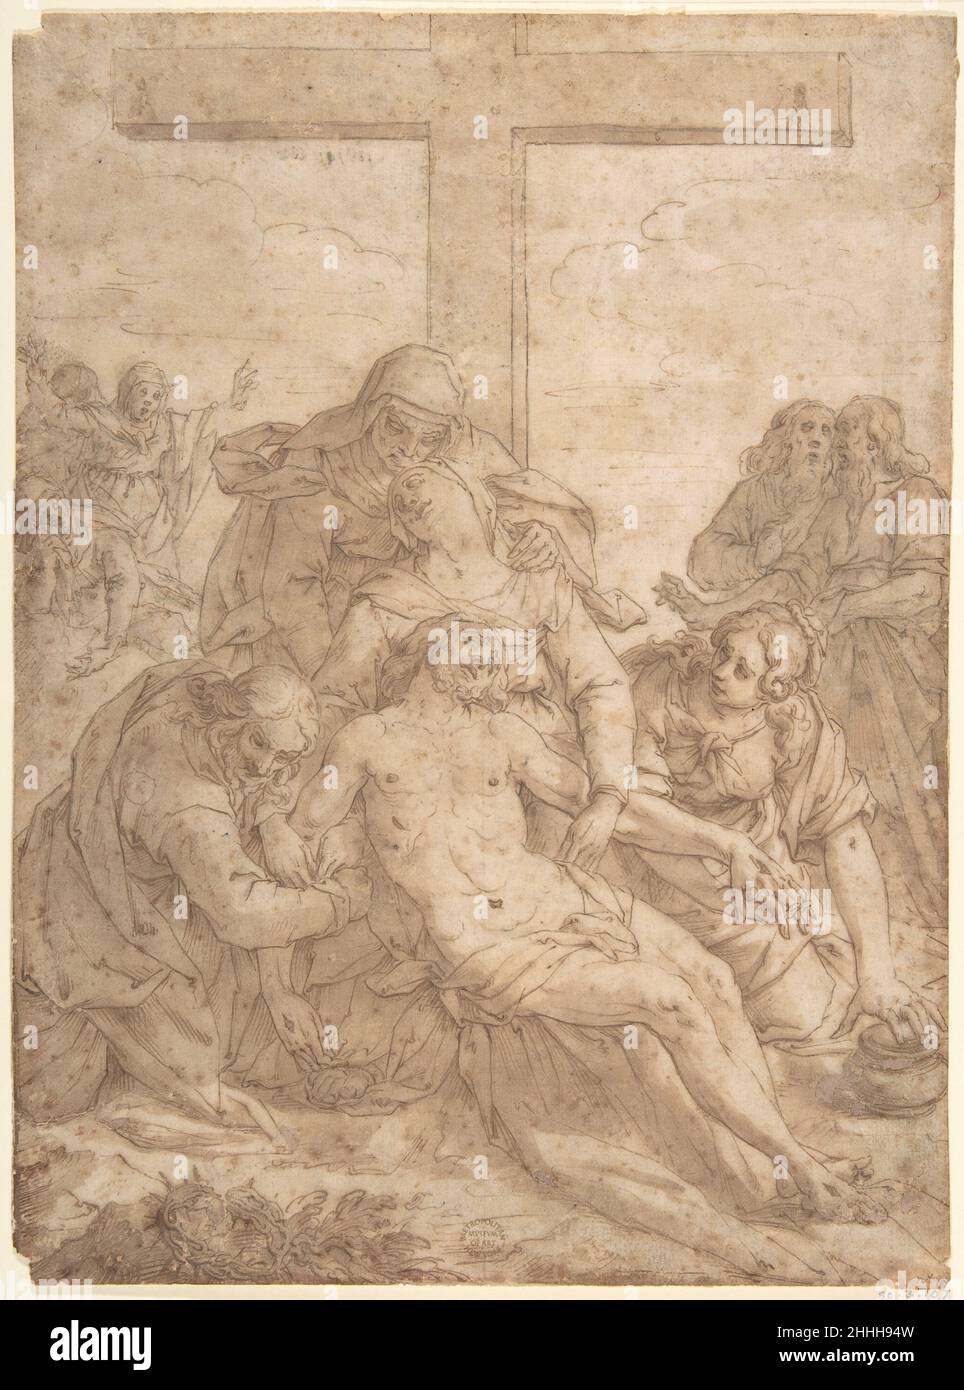 Descent from the Cross 1615–16 Pasquale Ottino (Pasqualotto) Italian. Descent from the Cross. Pasquale Ottino (Pasqualotto) (Italian, Verona 1578–1630 Verona). 1615–16. Pen and brown ink, brush and brown wash on buff paper. Drawings Stock Photo